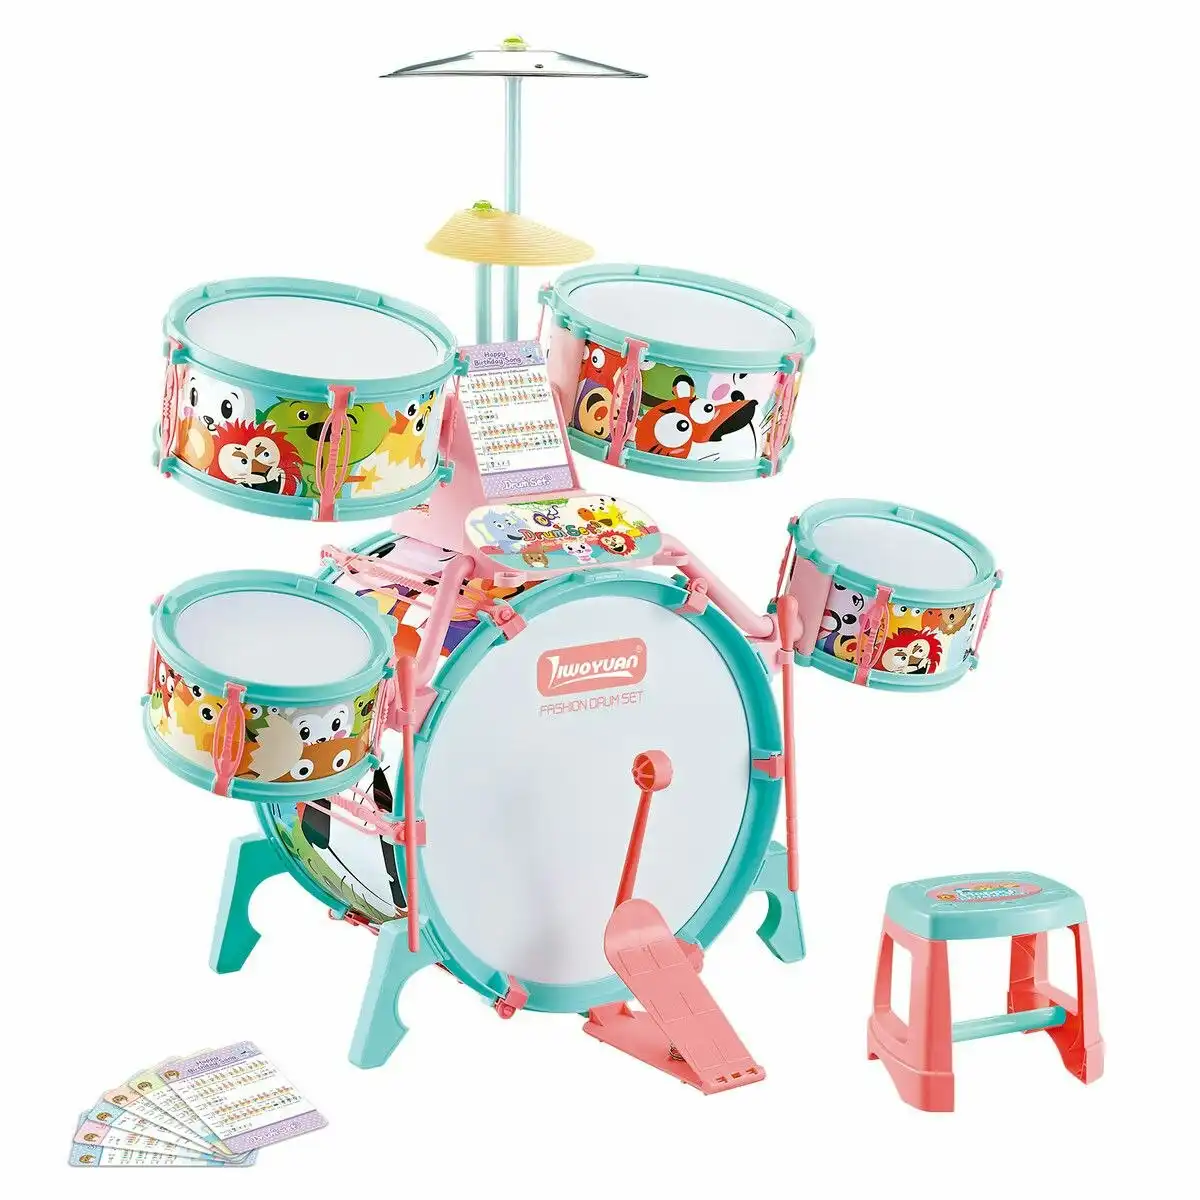 Ausway Jazz Drum Play Set Dynamic for Toddler Kid Educational Musical Instrument Toy Plastic Colourful 17 Pieces